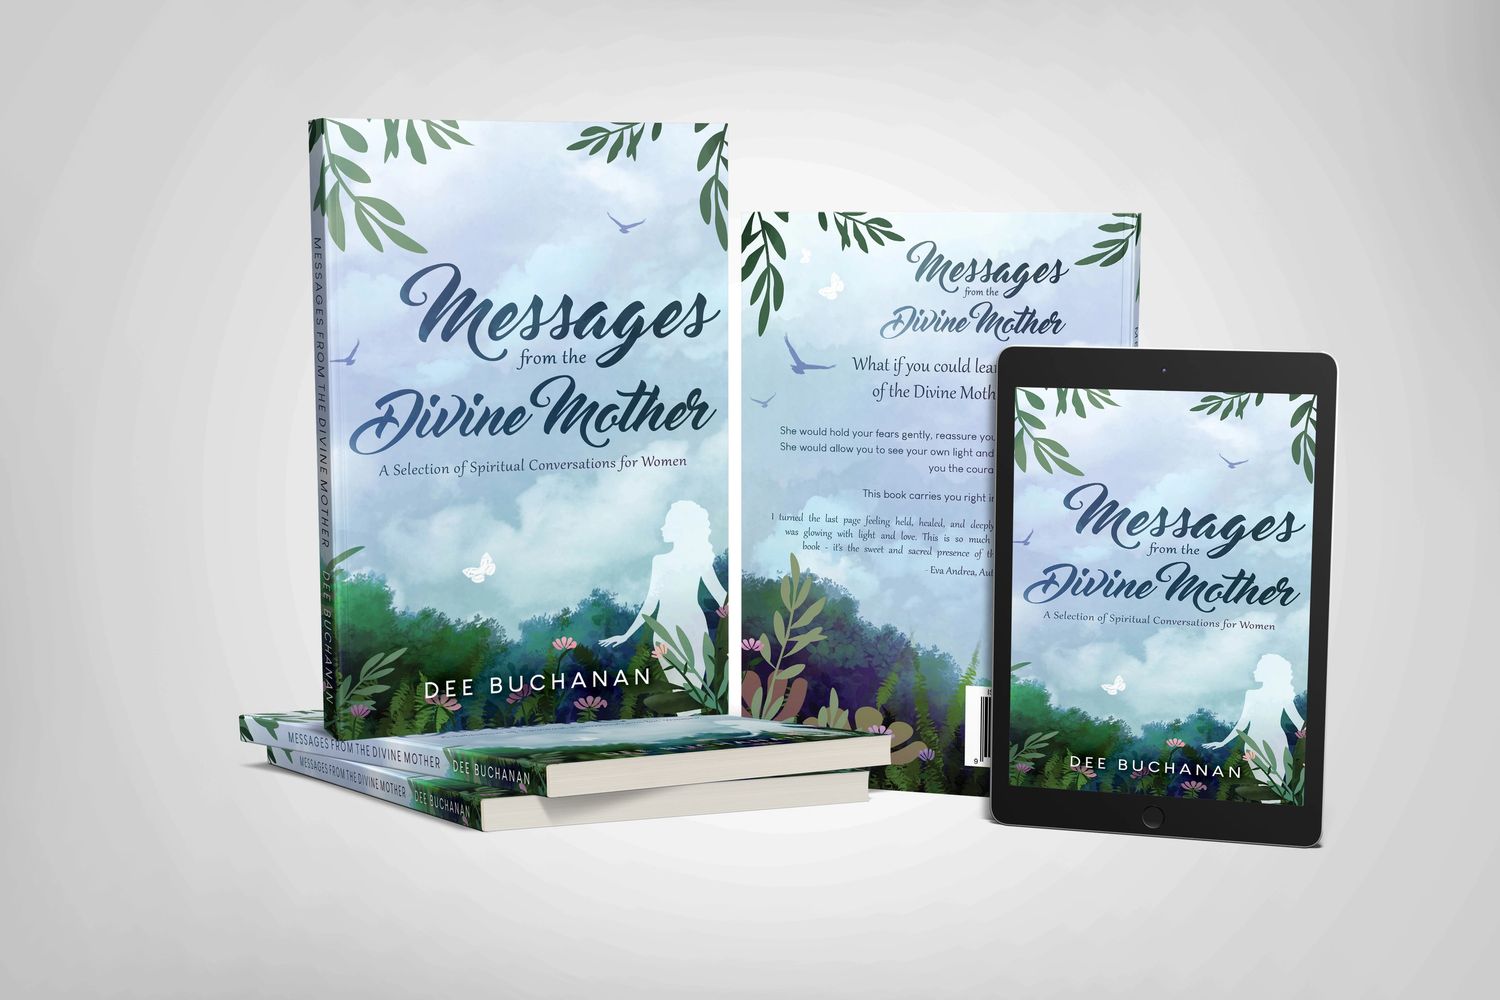 Messages from Divine Mother by Dee Buchanan